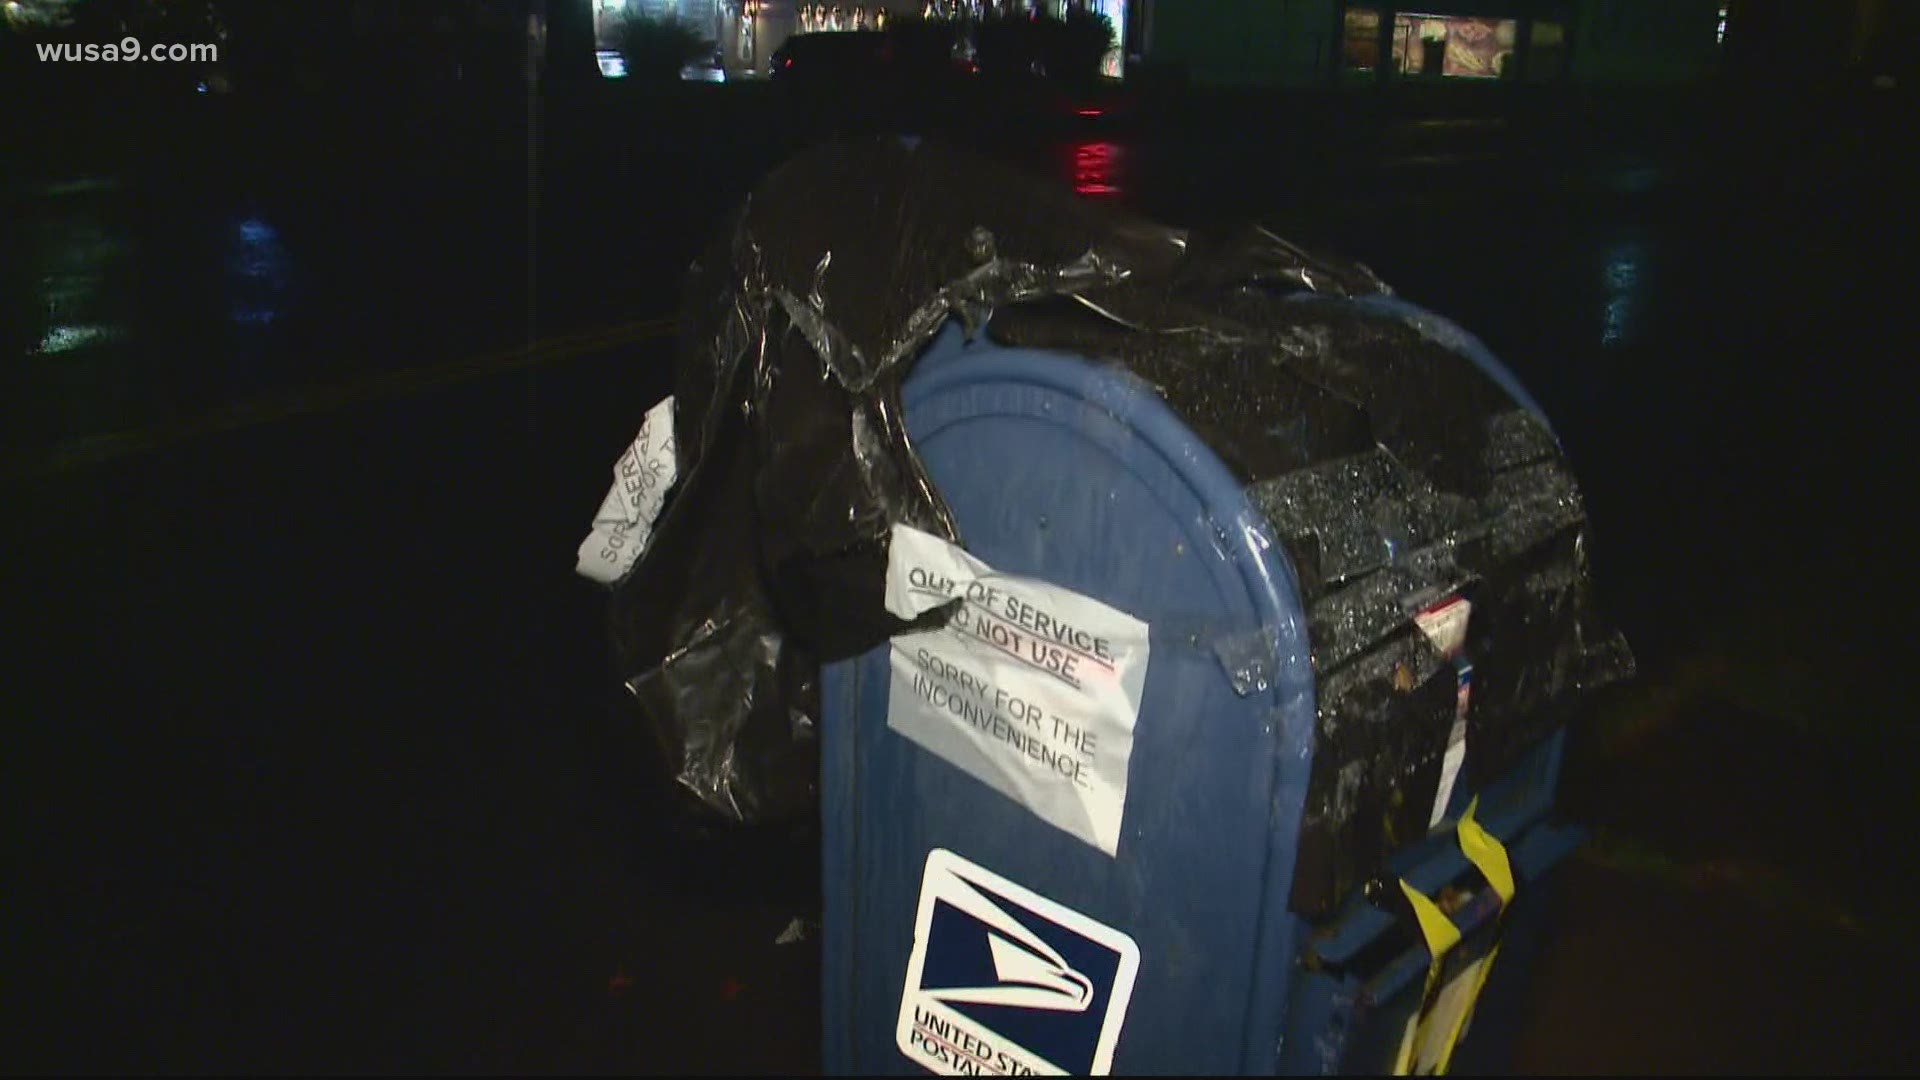 Police said the mailboxes have been broken into several times this year.